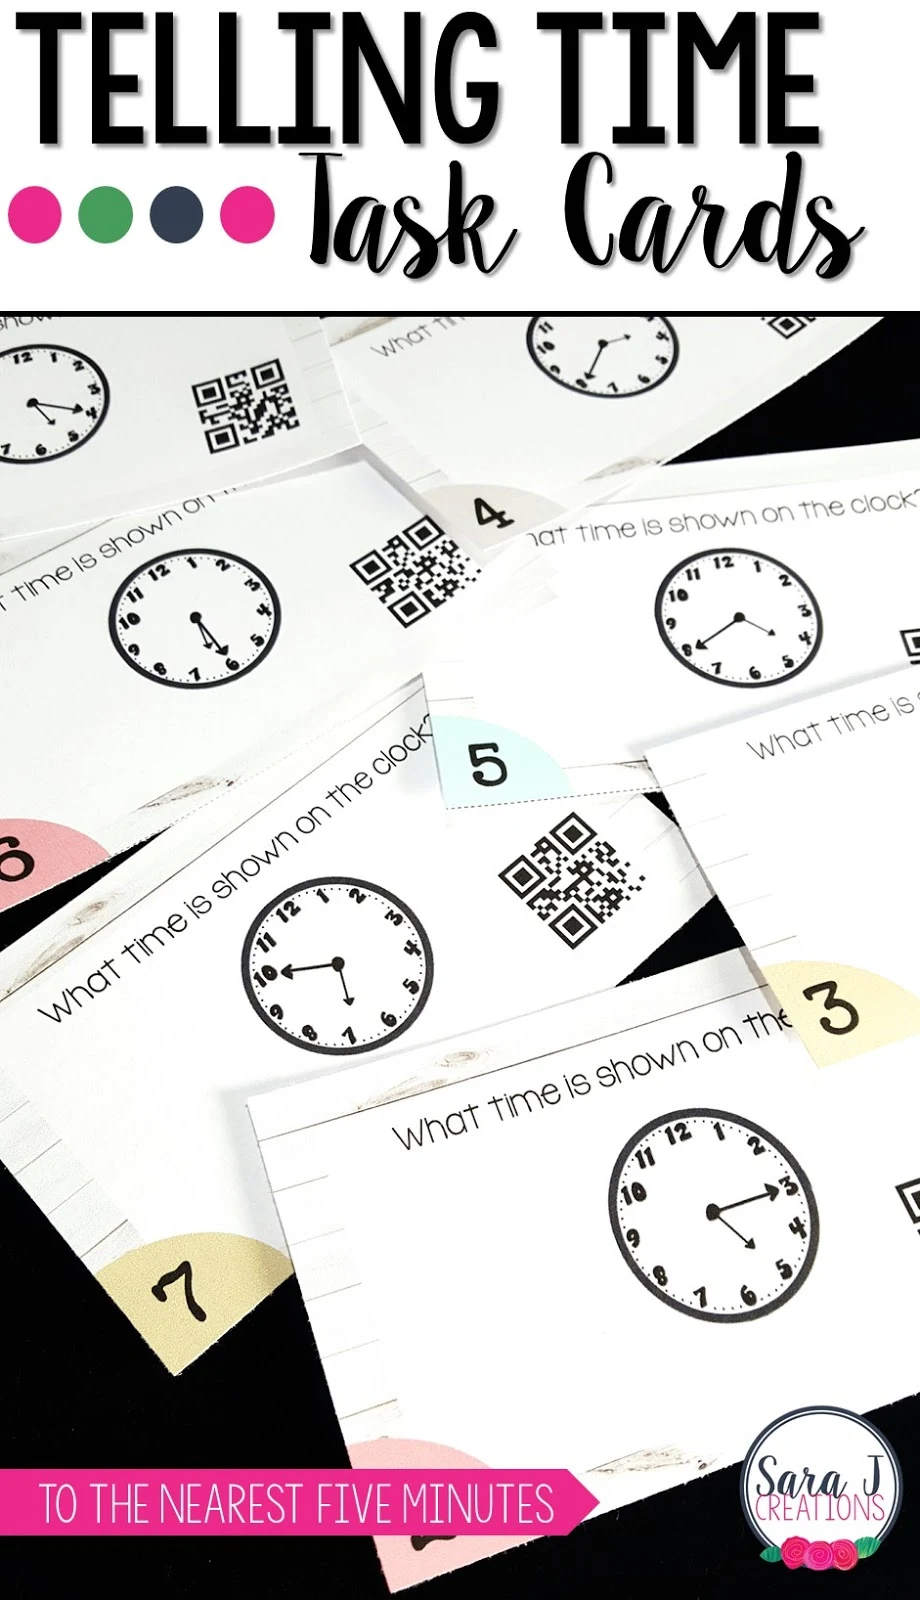 Telling time activities for first and second grade. Use these Task Cards to practice time to the hour and half hour and the nearest 5 minutes. QR Codes included!